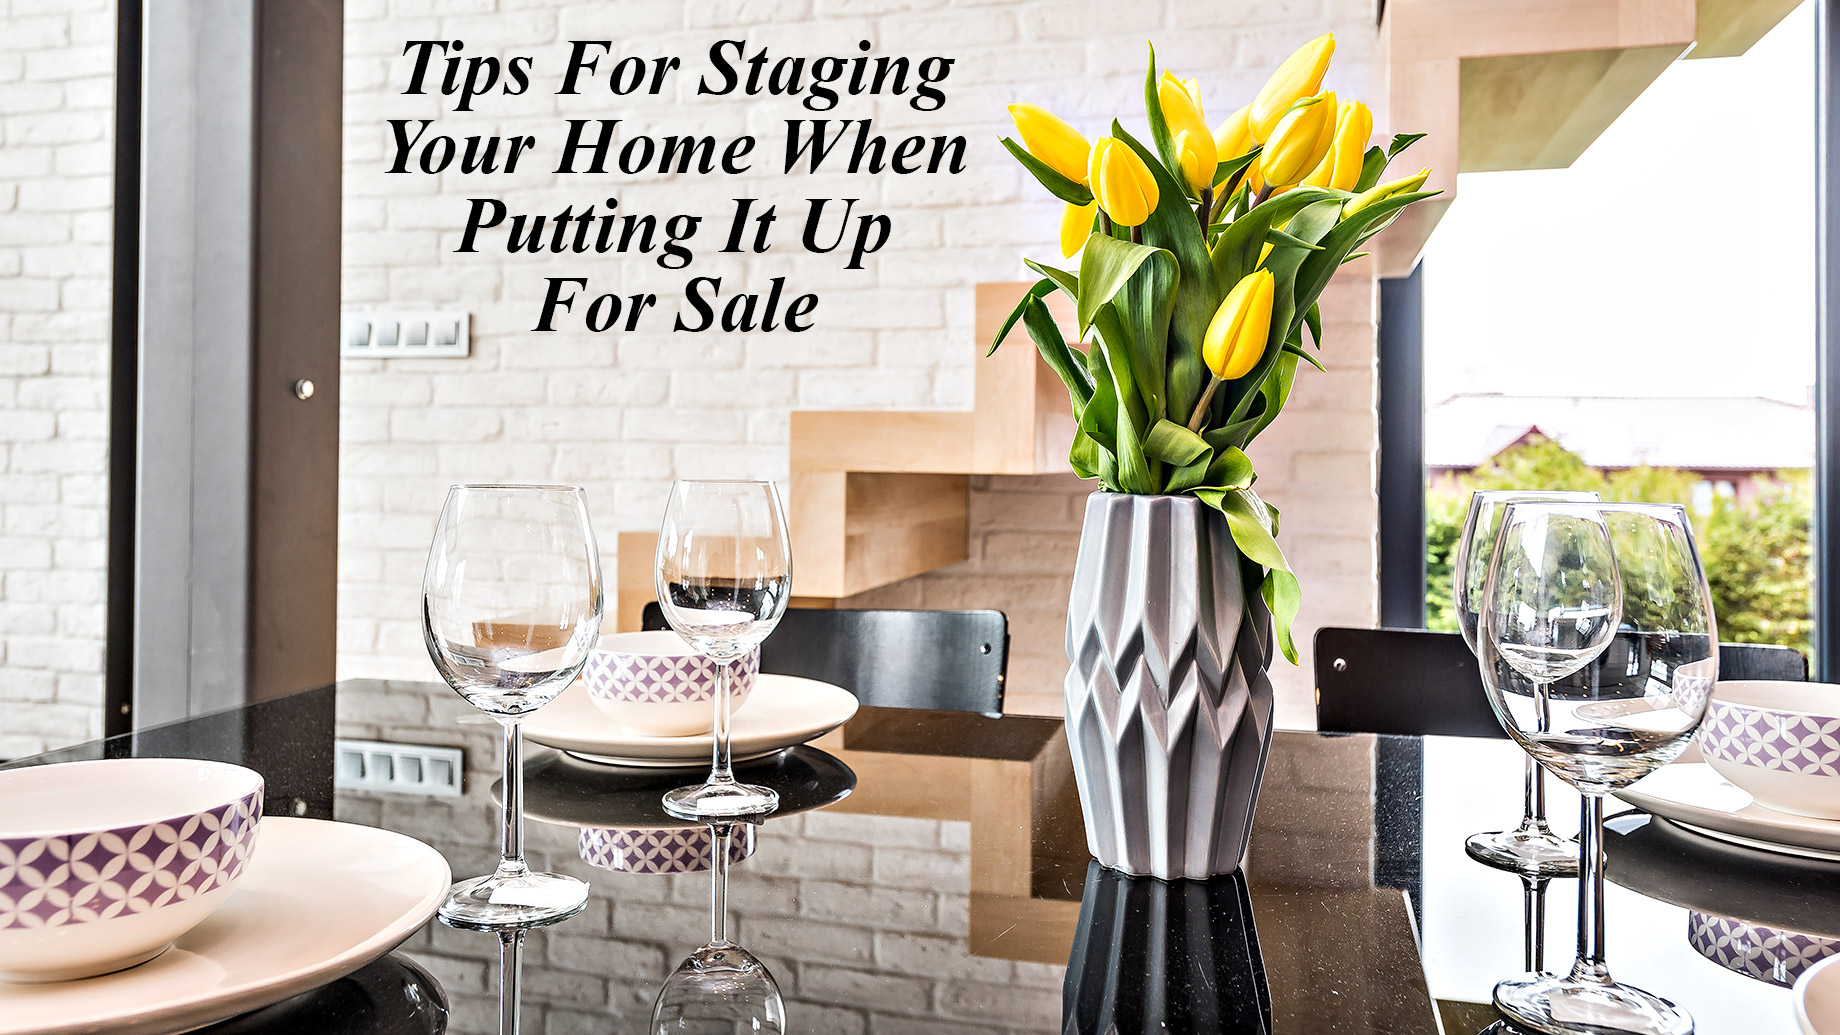 Tips For Staging Your Home When Putting It Up For Sale